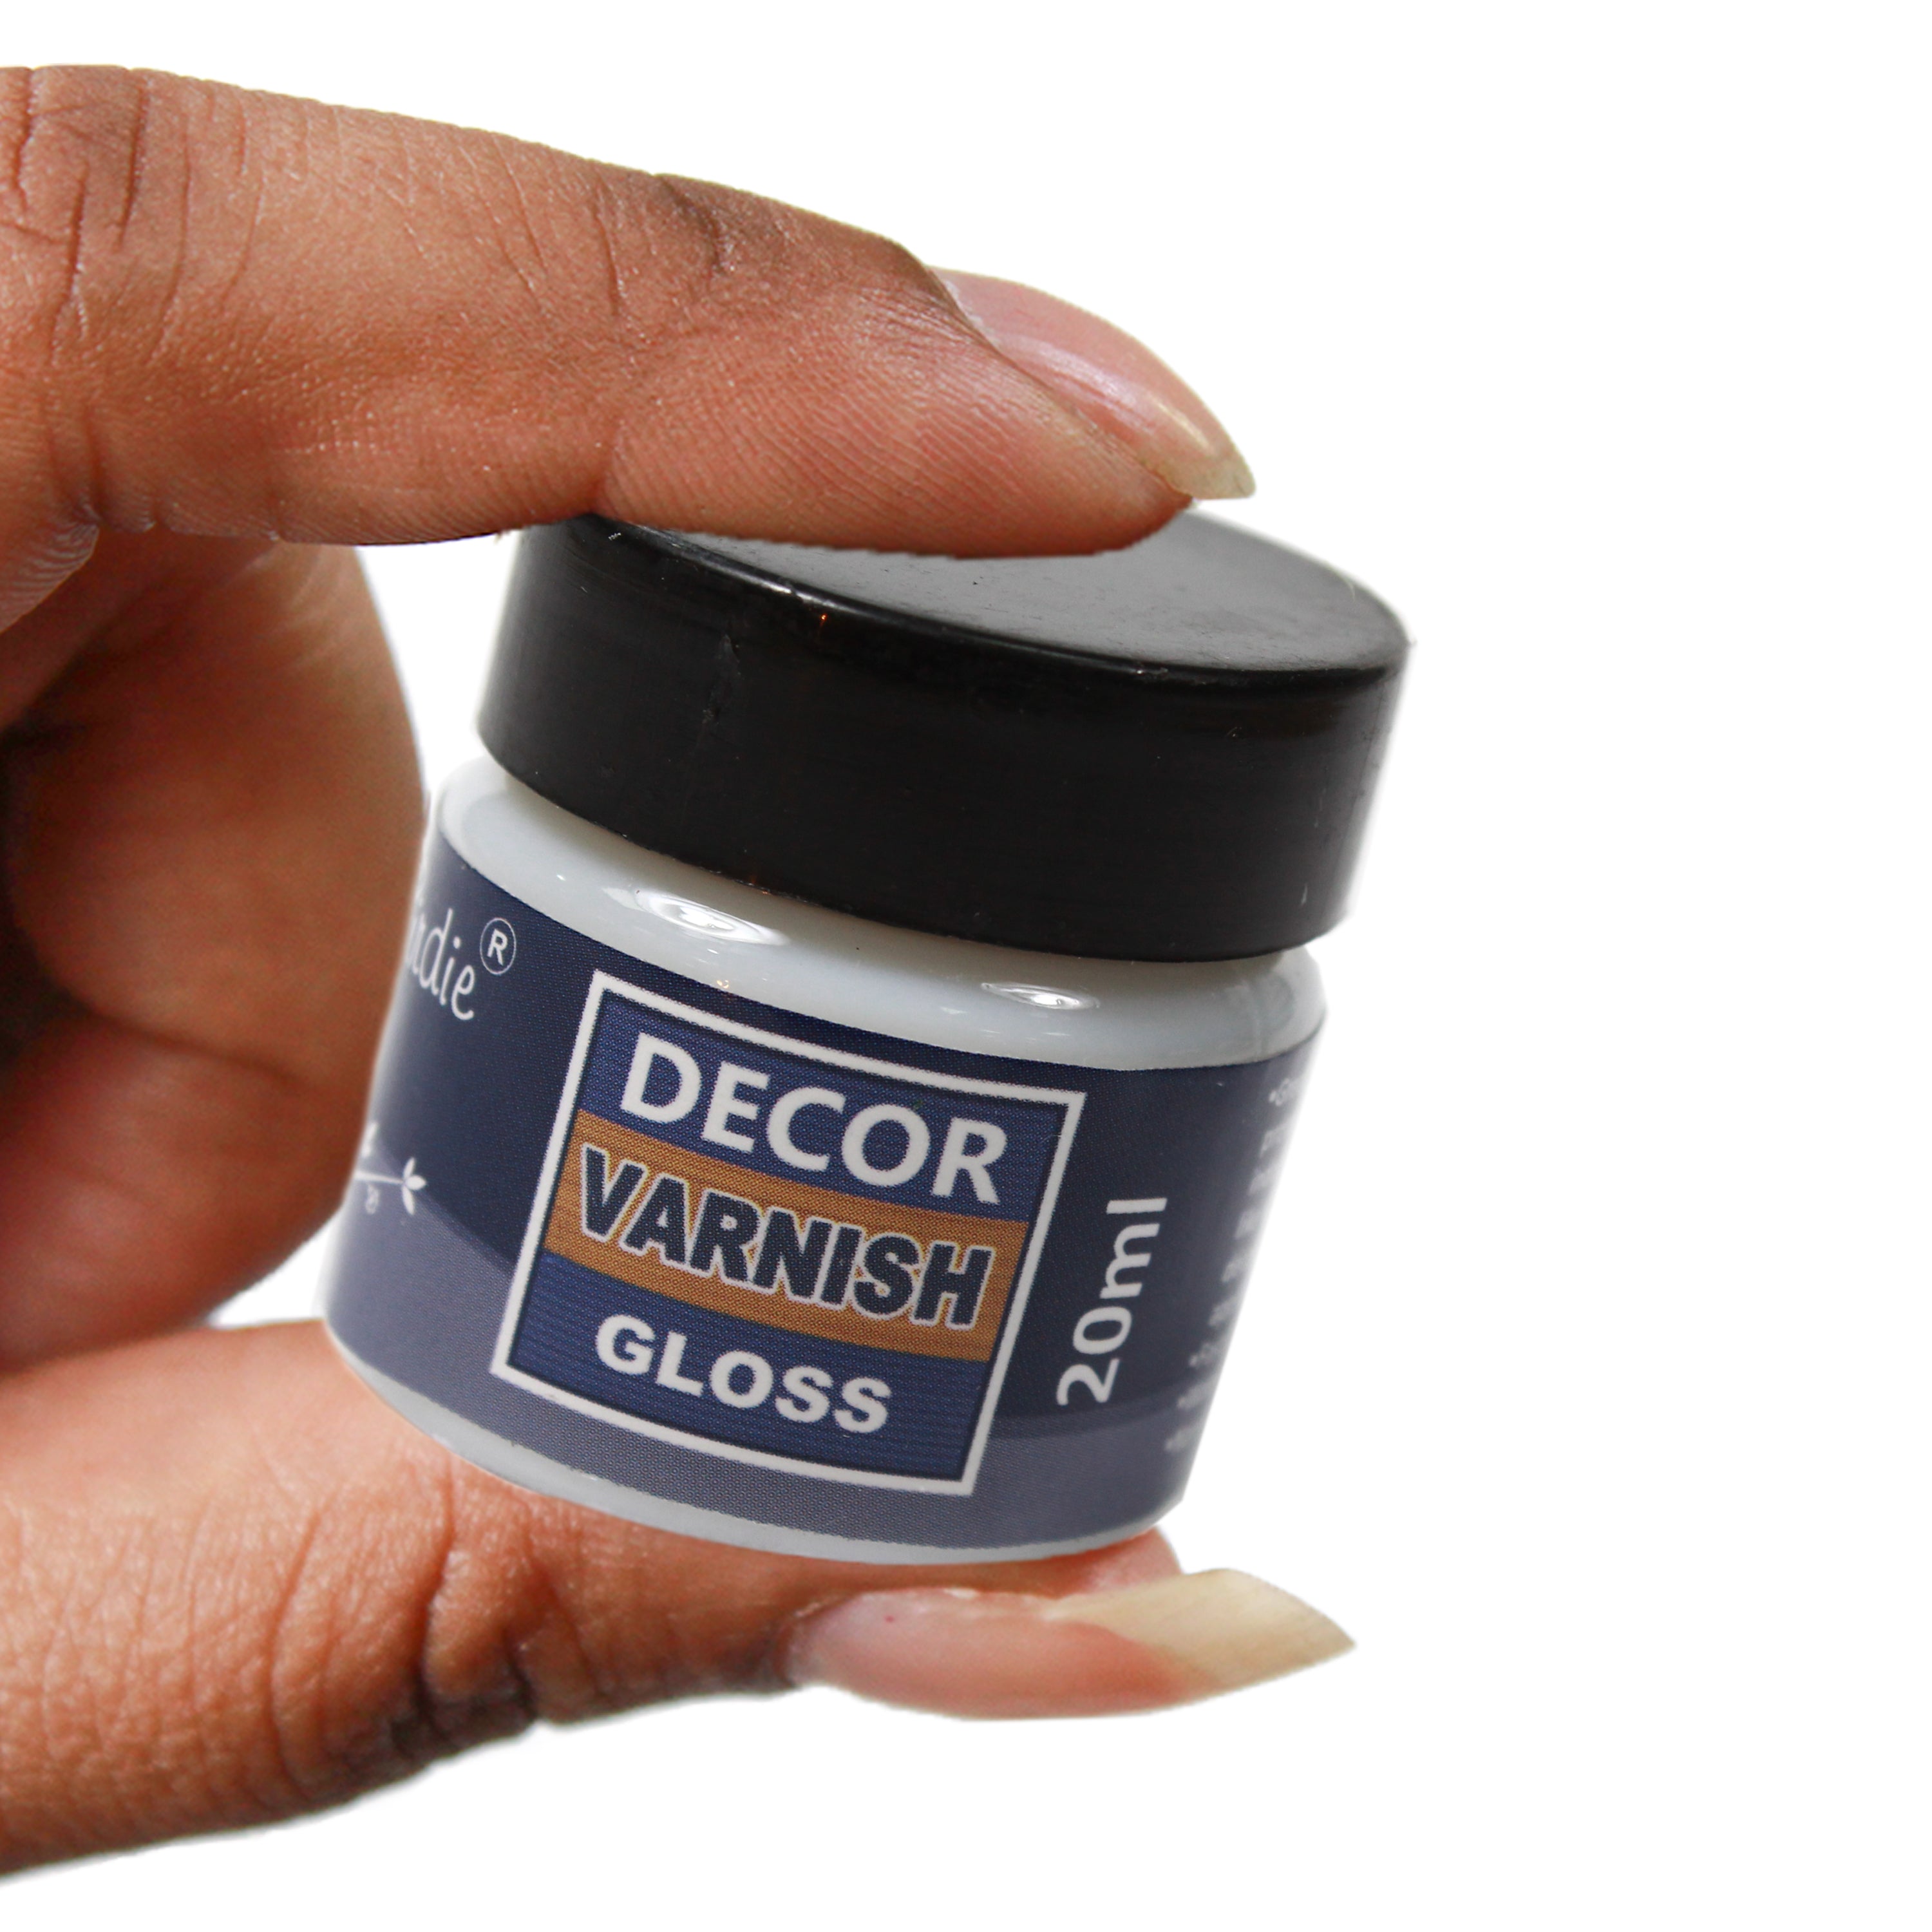 Share Pack Decore Varnish Glossy 6Pc X 20Ml Each Lb